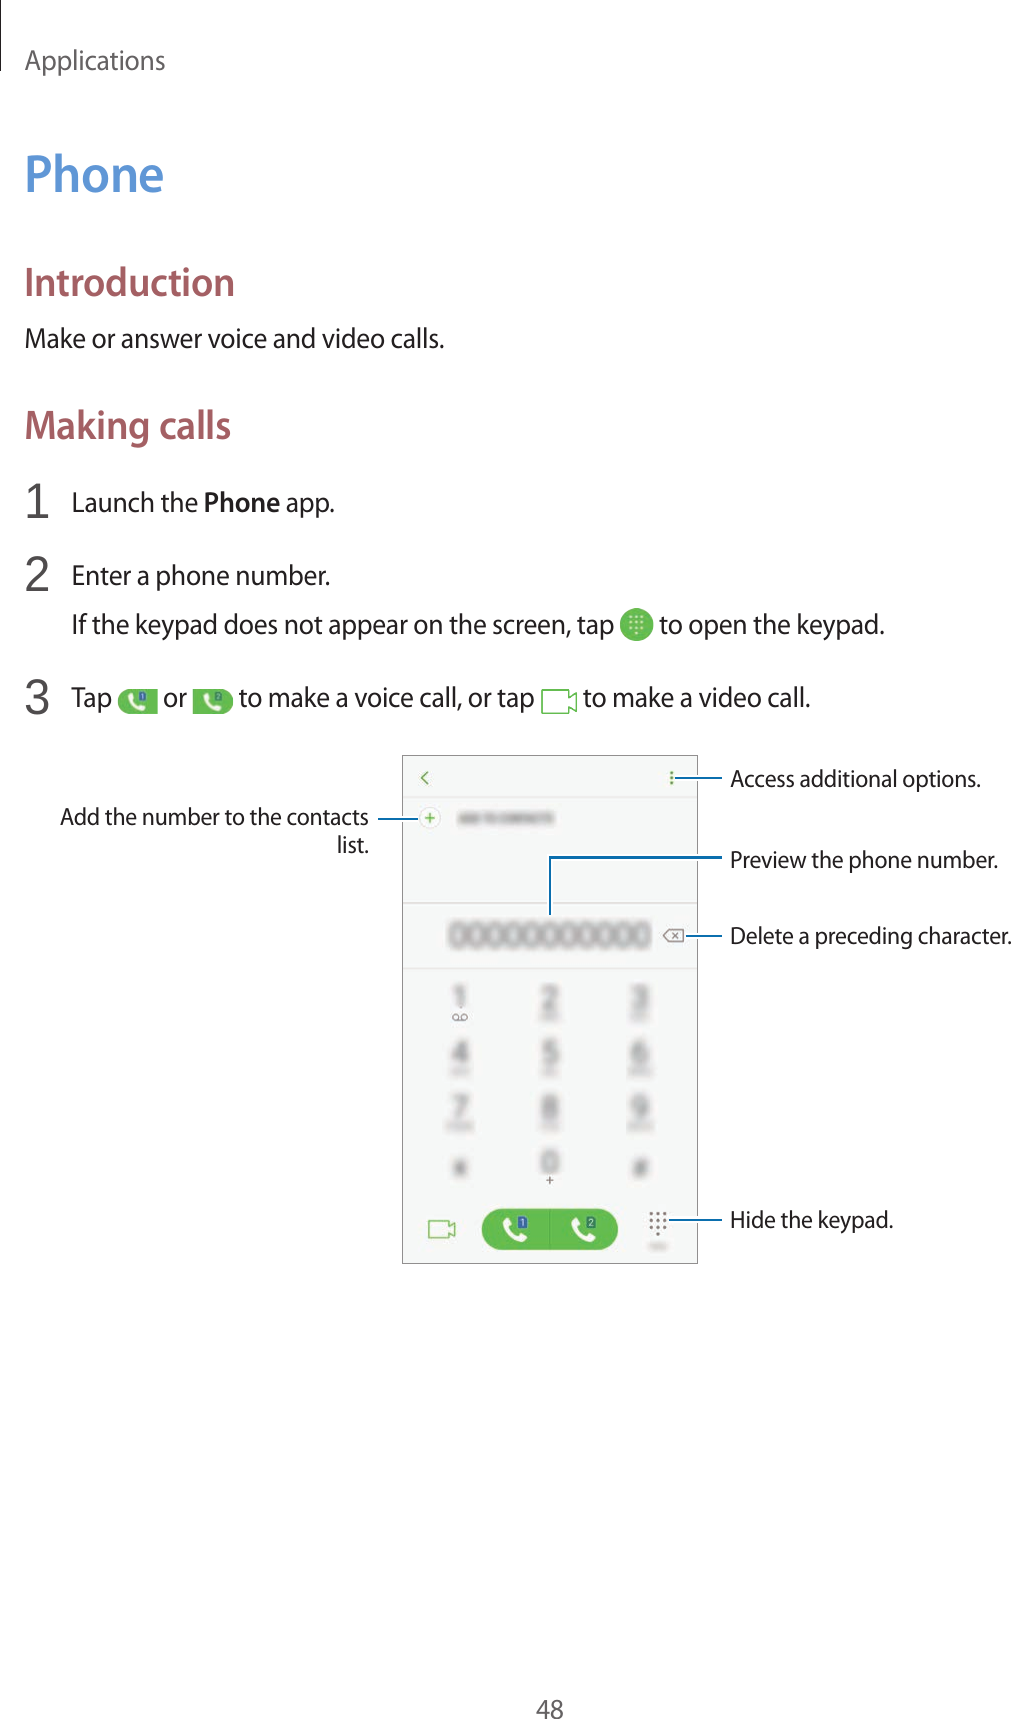 Applications48PhoneIntroductionMake or answer voice and video calls.Making calls1  Launch the Phone app.2  Enter a phone number.If the keypad does not appear on the screen, tap   to open the keypad.3  Tap   or   to make a voice call, or tap   to make a video call.Add the number to the contacts list. Preview the phone number.Hide the keypad.Delete a preceding character.Access additional options.